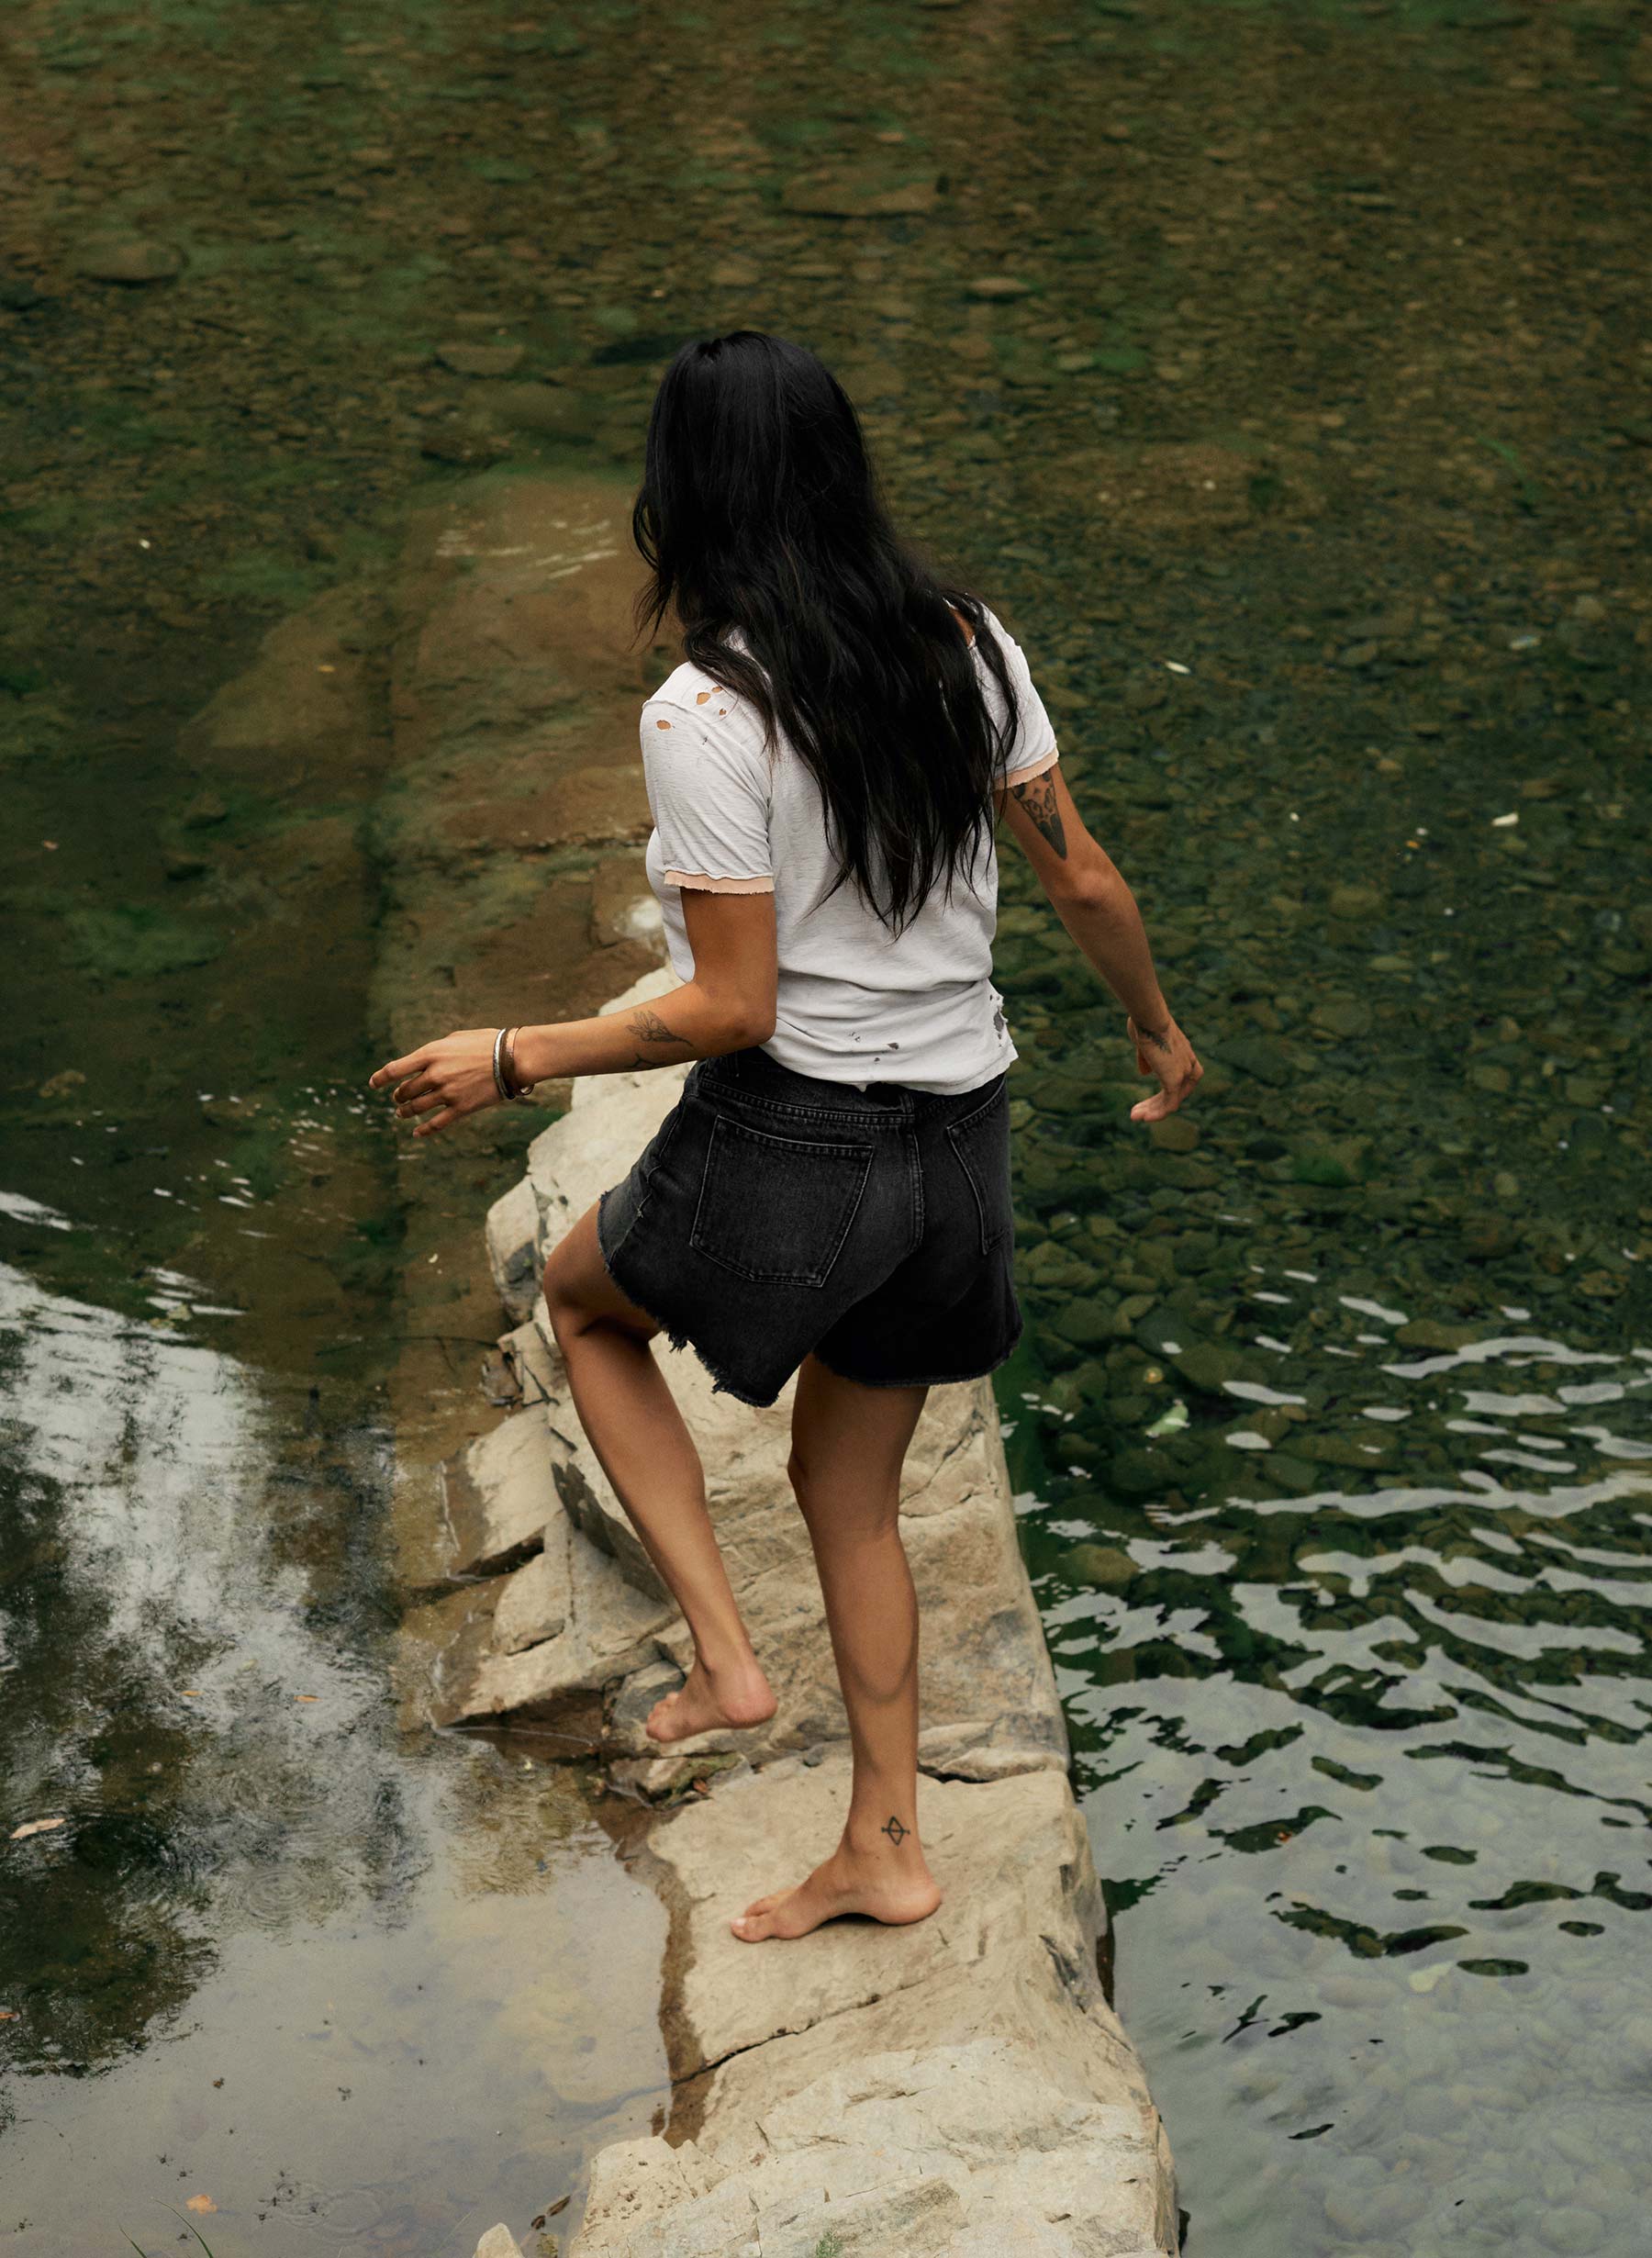 Water, Hand, Shoulder, People in nature, Leg, Flash photography, Waist, Thigh, Happy, Bank